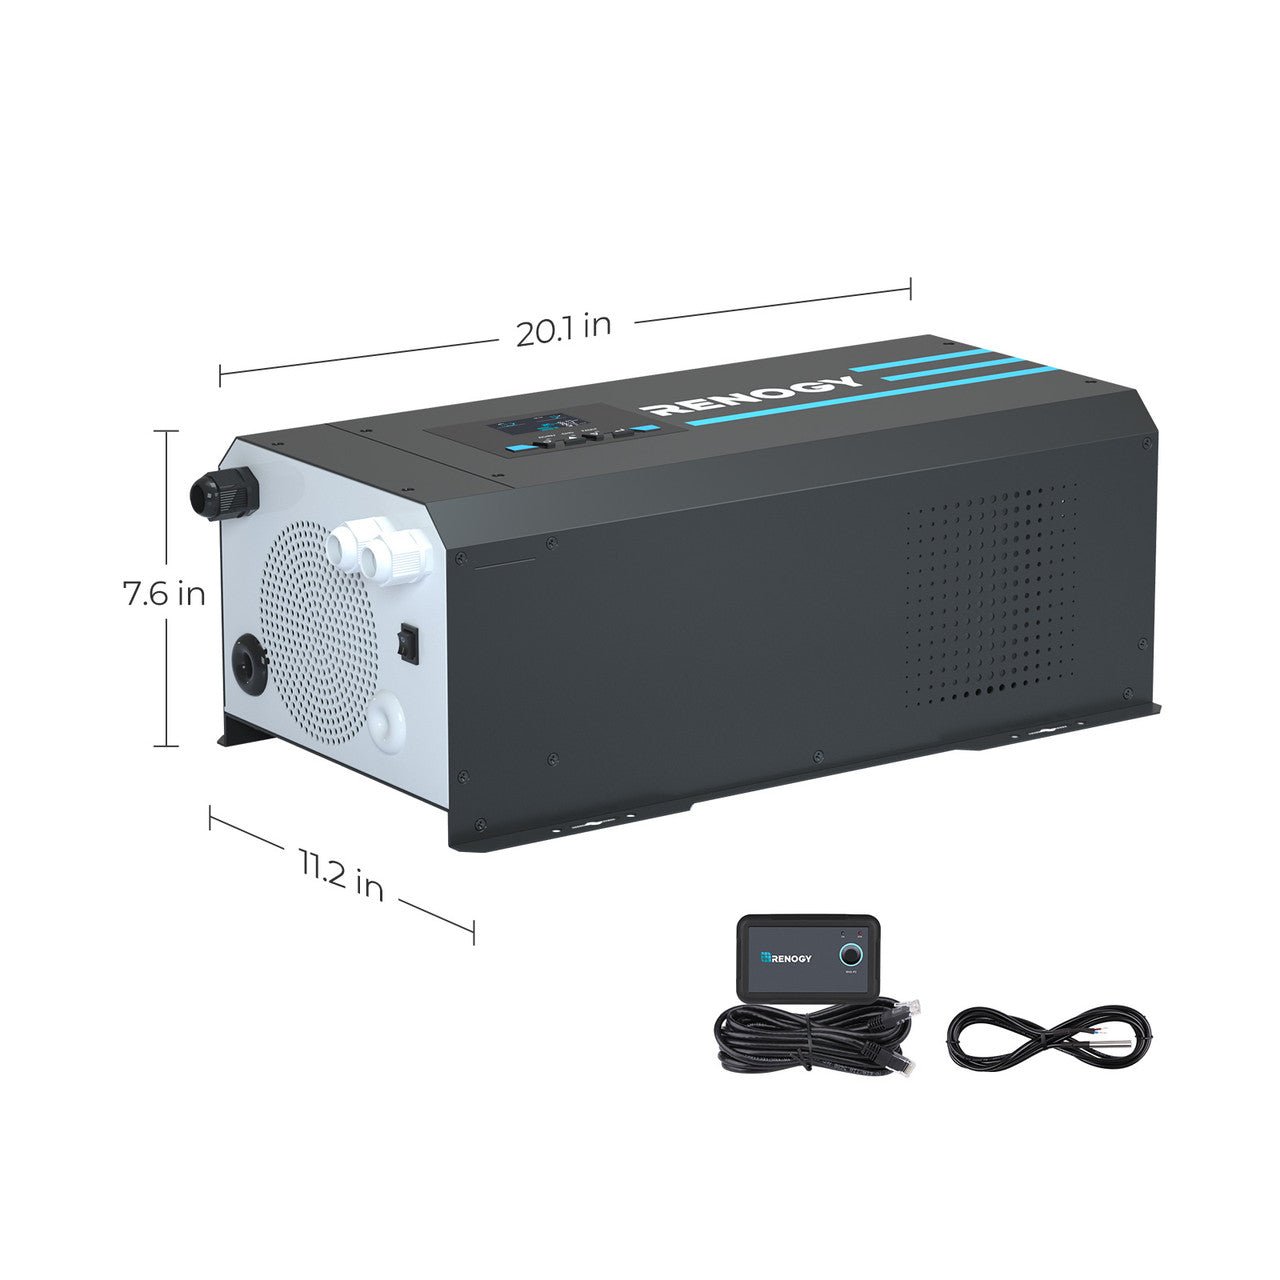 Renogy 2000W 12V Pure Sine Wave Inverter Charger w/ LCD Display - Solar Generators and Power Stations Plus